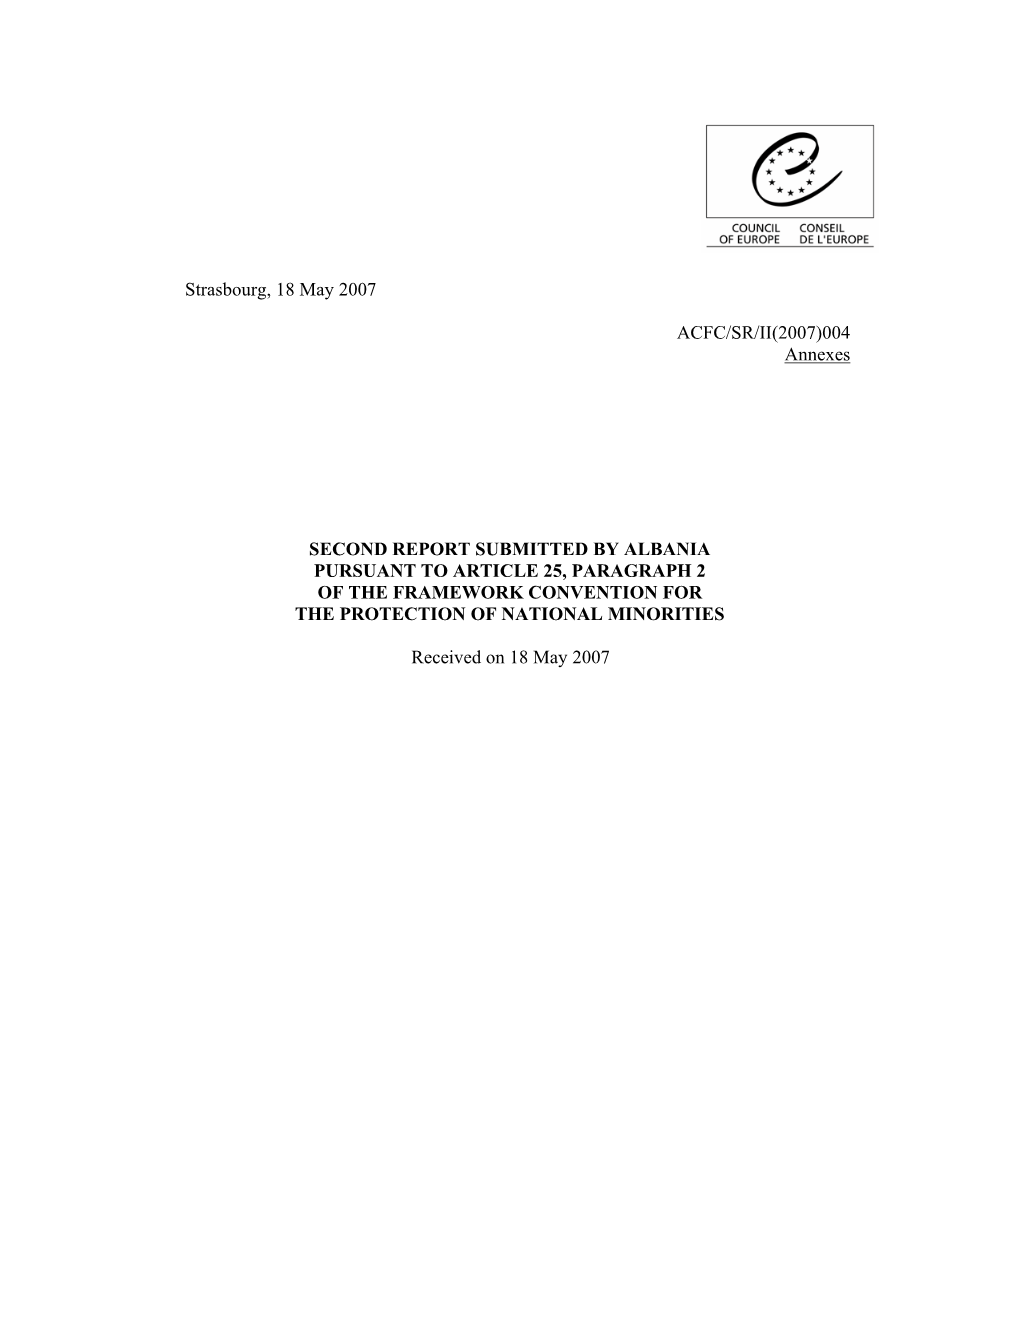 004 Annexes SECOND REPORT SUBMITTED by ALBANIA PURSUANT to ARTICLE 25, PARAGRAPH 2 of TH